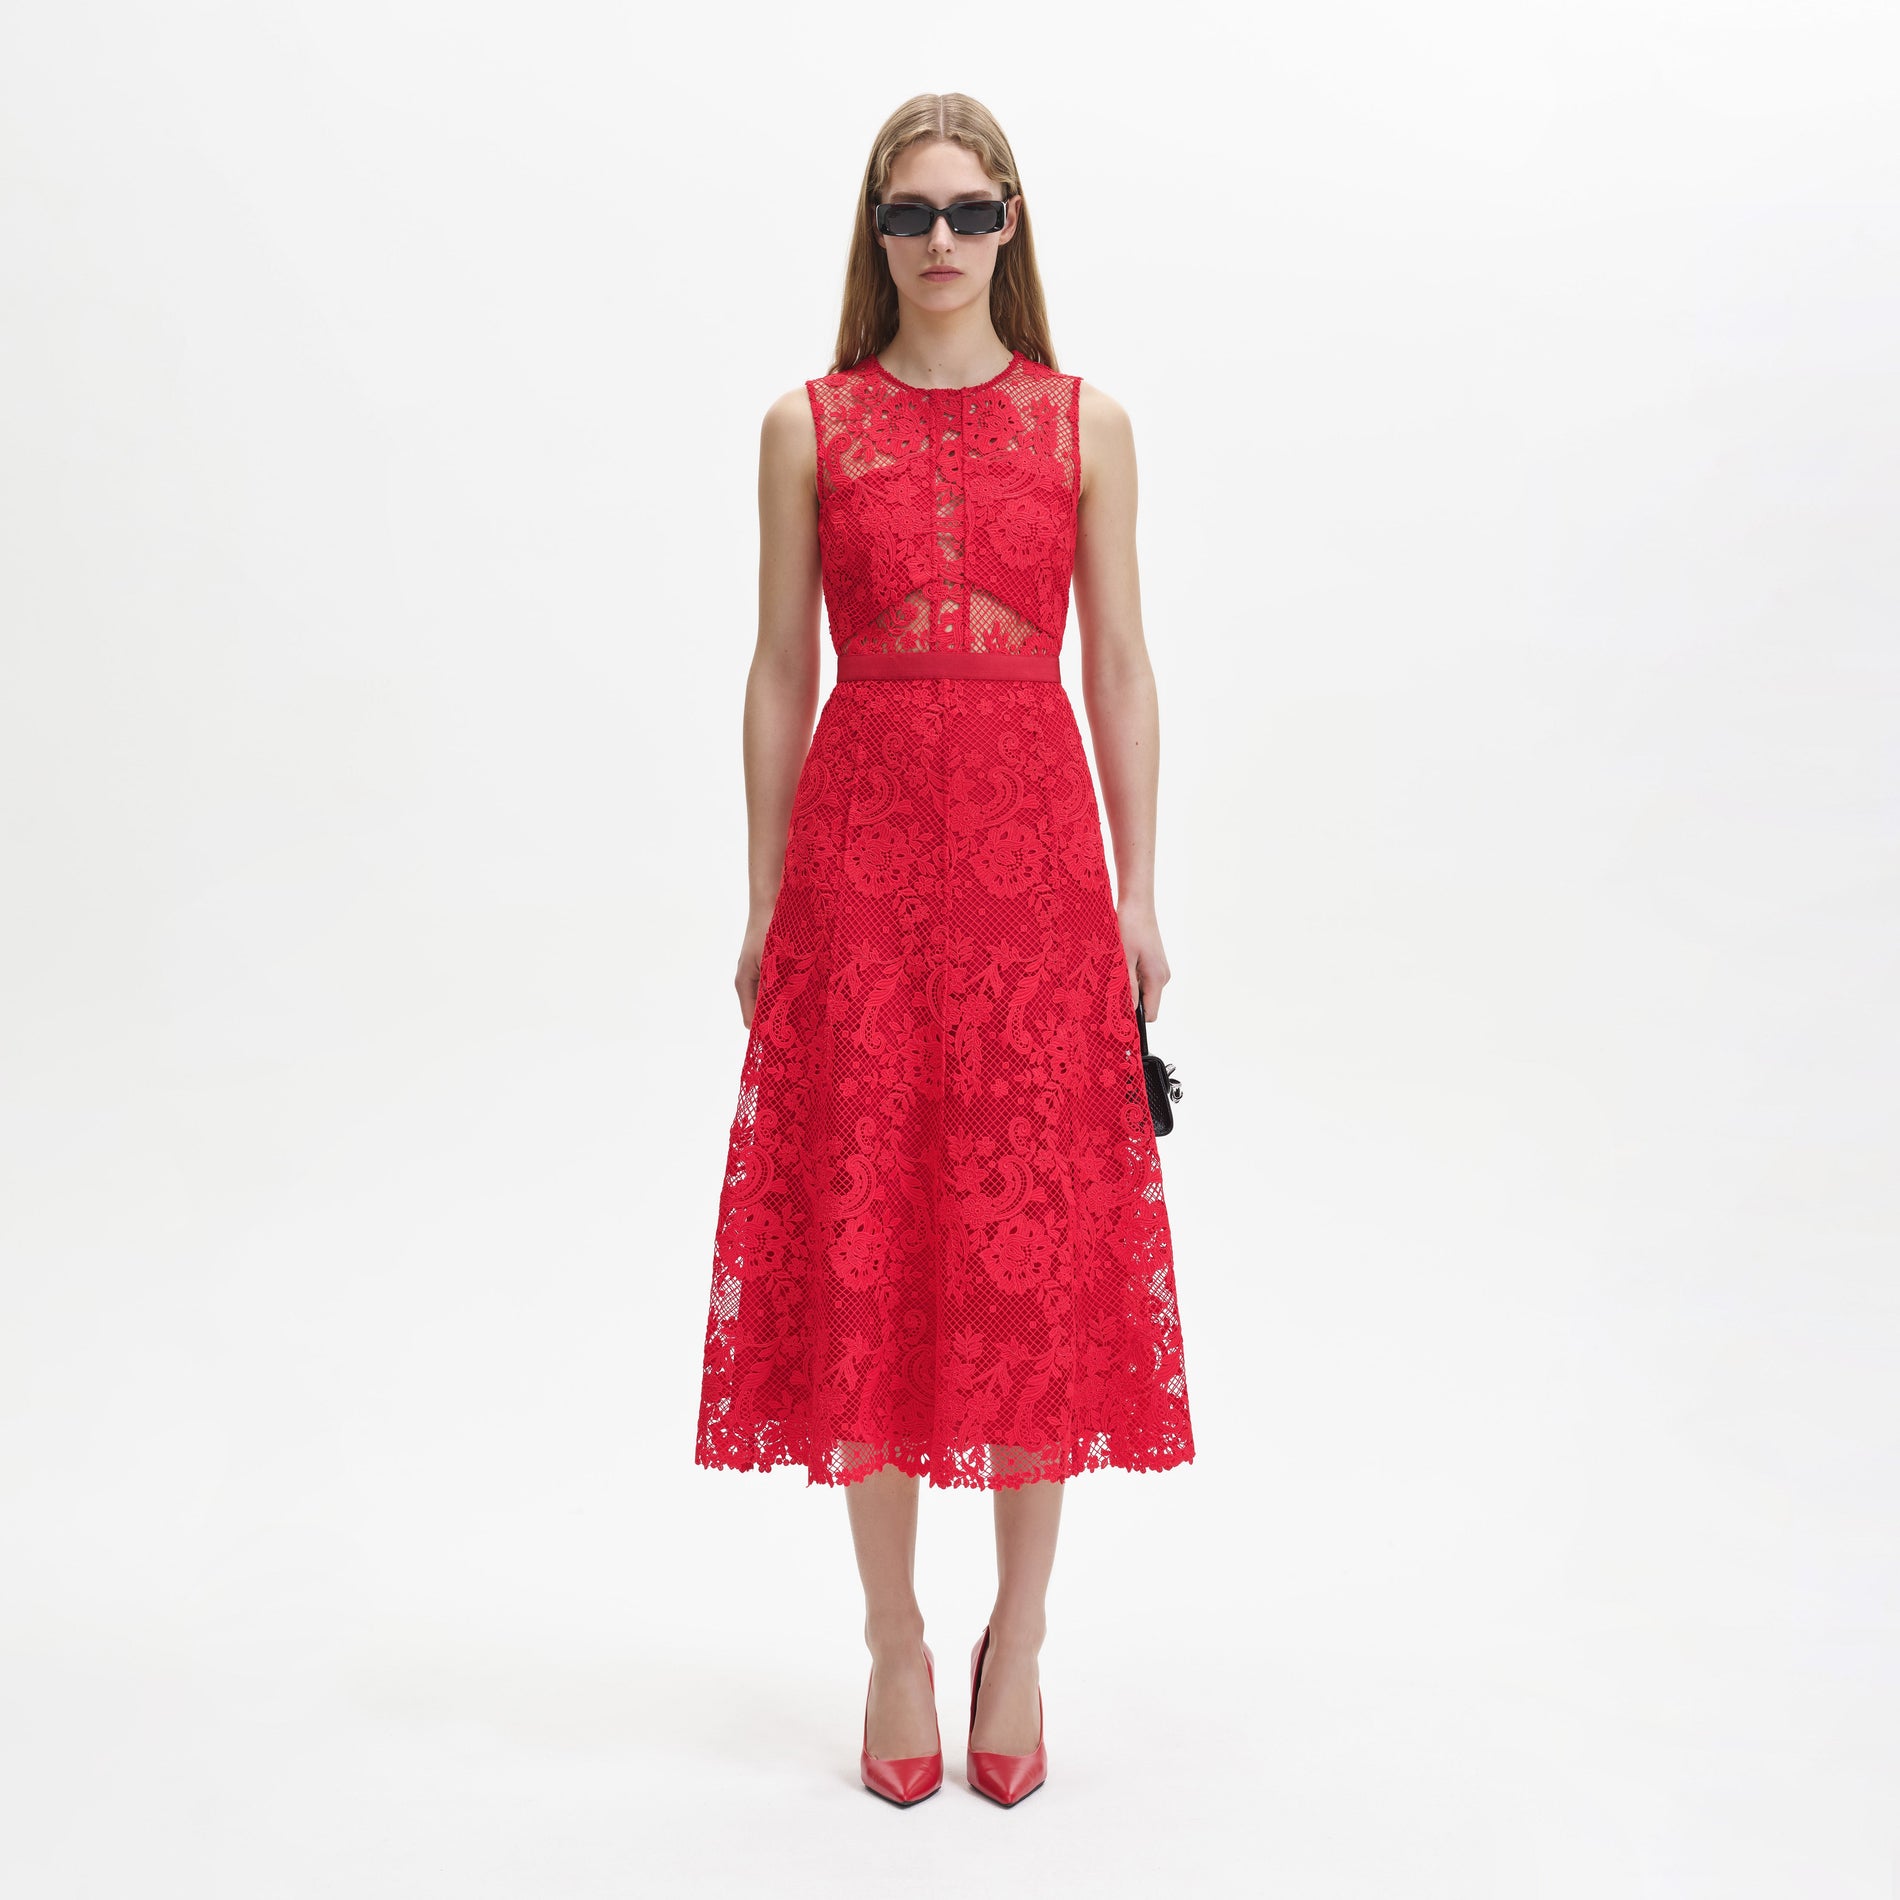 Red Lace High Neck Midi Dress